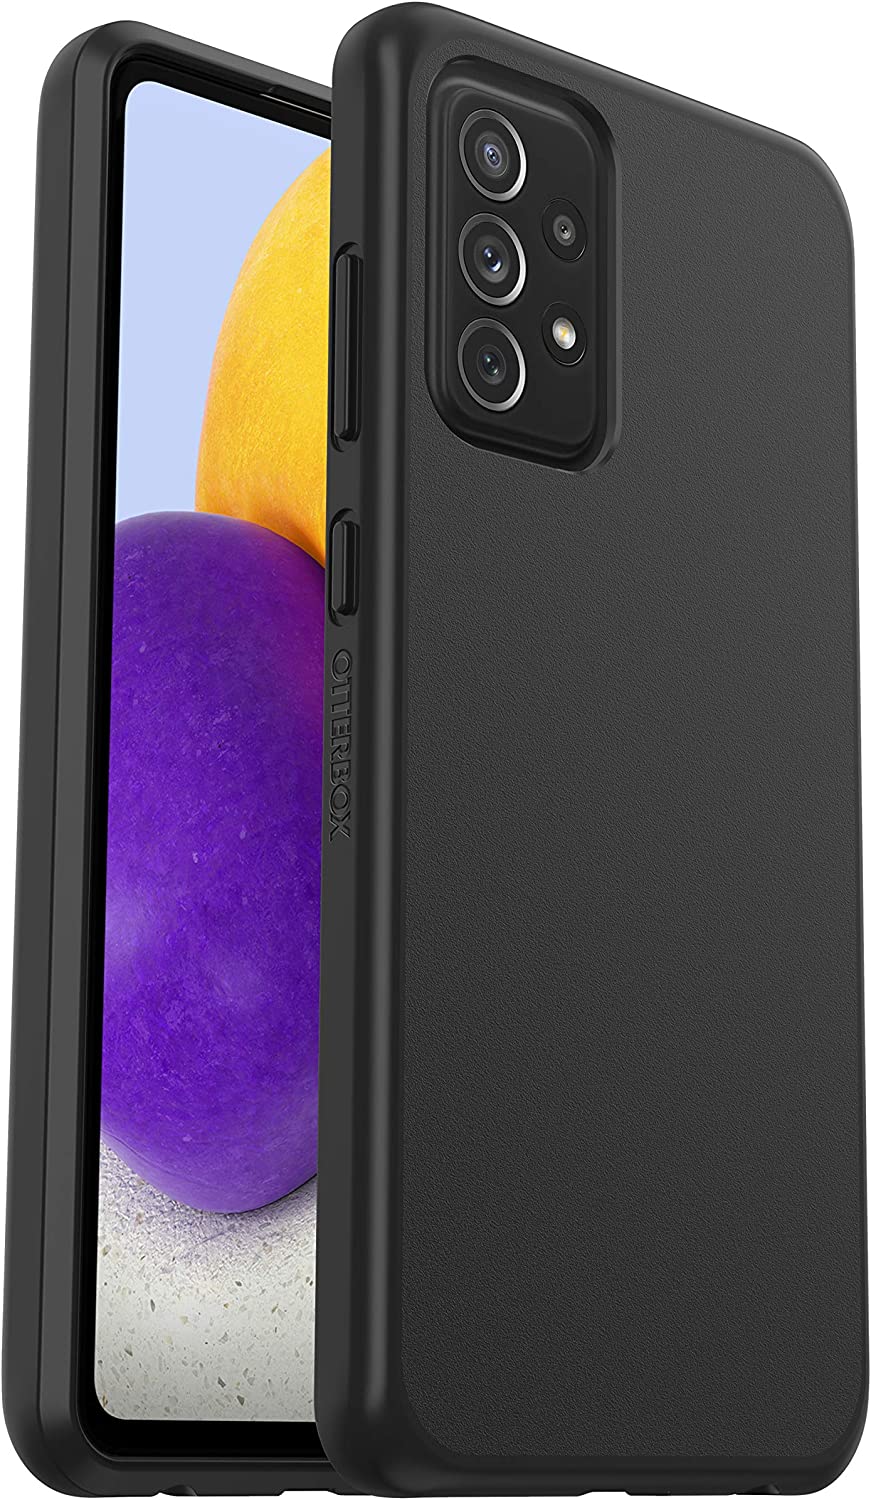 OtterBox REACT SERIES Case for Samsung Galaxy A72 - Black (Certified Refurbished)